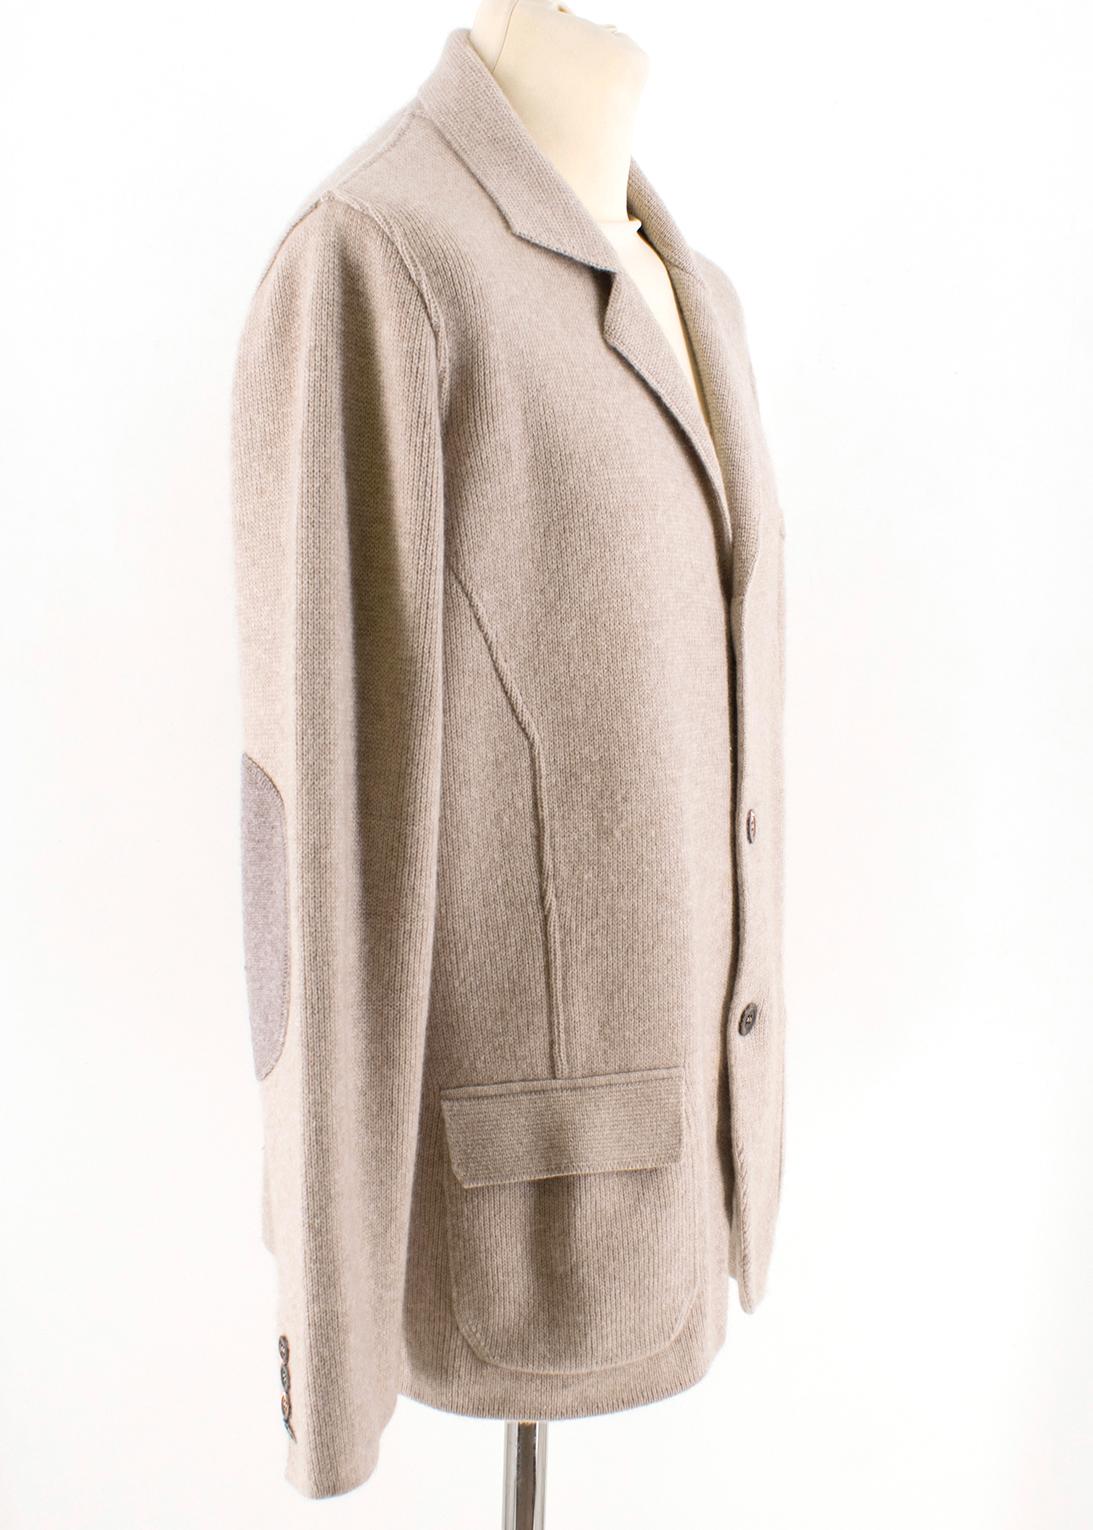 Emanuele Maffeis Beige Cashmere Men's Blazer

Soft cashmere men's cardigan,
Long sleeves,
Button up front fastening,
Two front flap pockets,
Left chest pocket, 
Button up cuffs,
Features standard notch lapel and shawl collar,
Features elbow patch